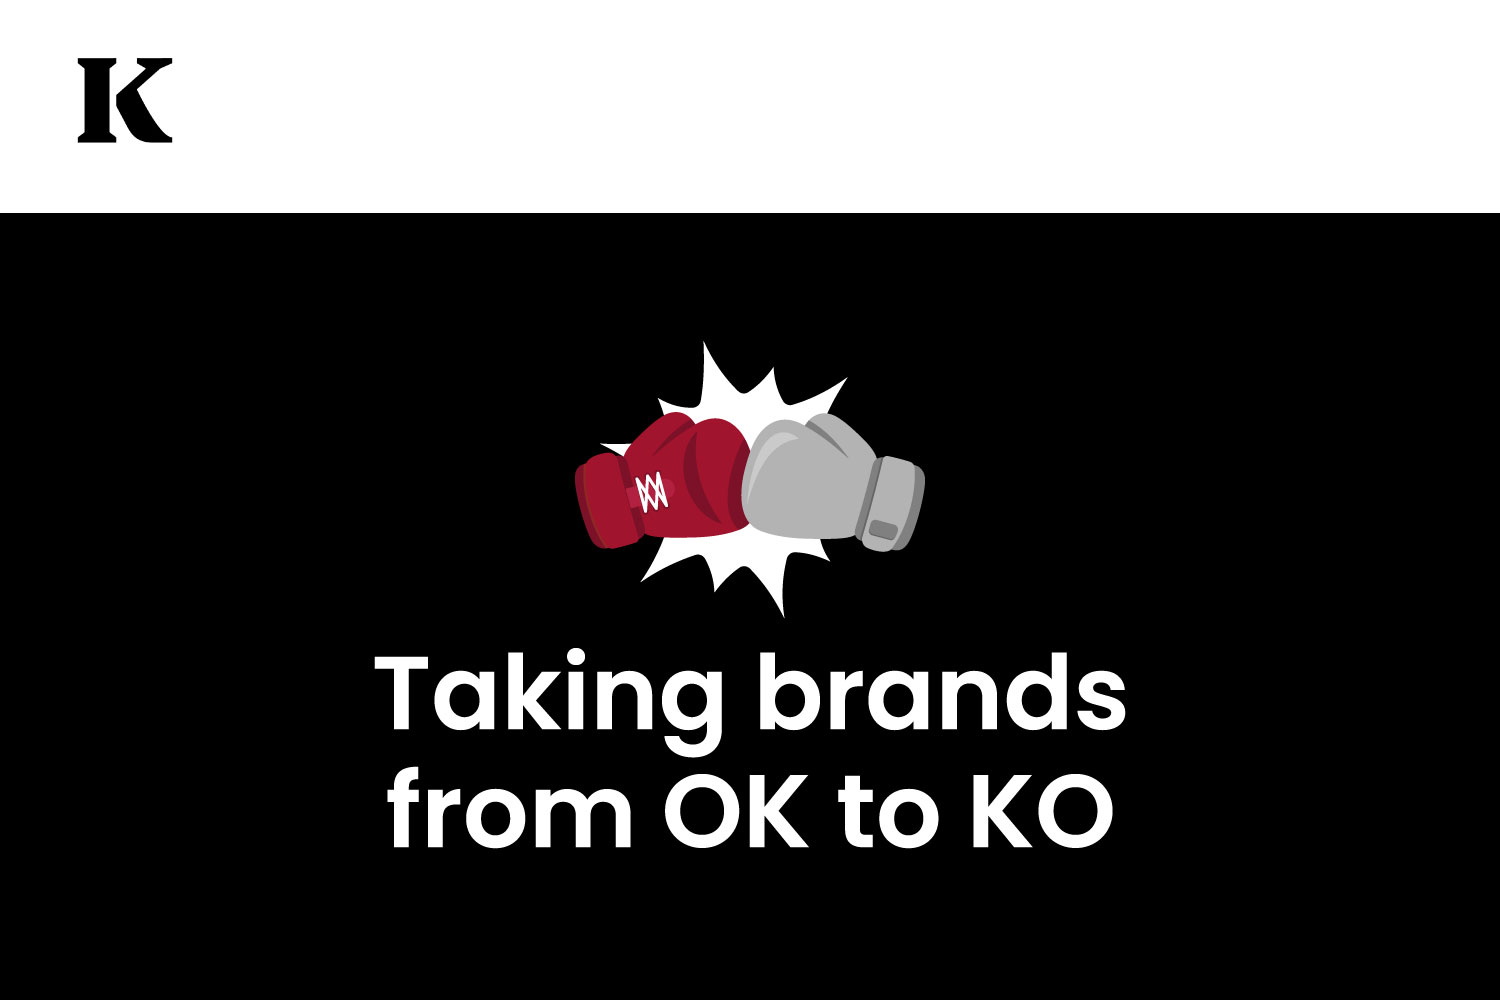 Taking brands from OK to KO